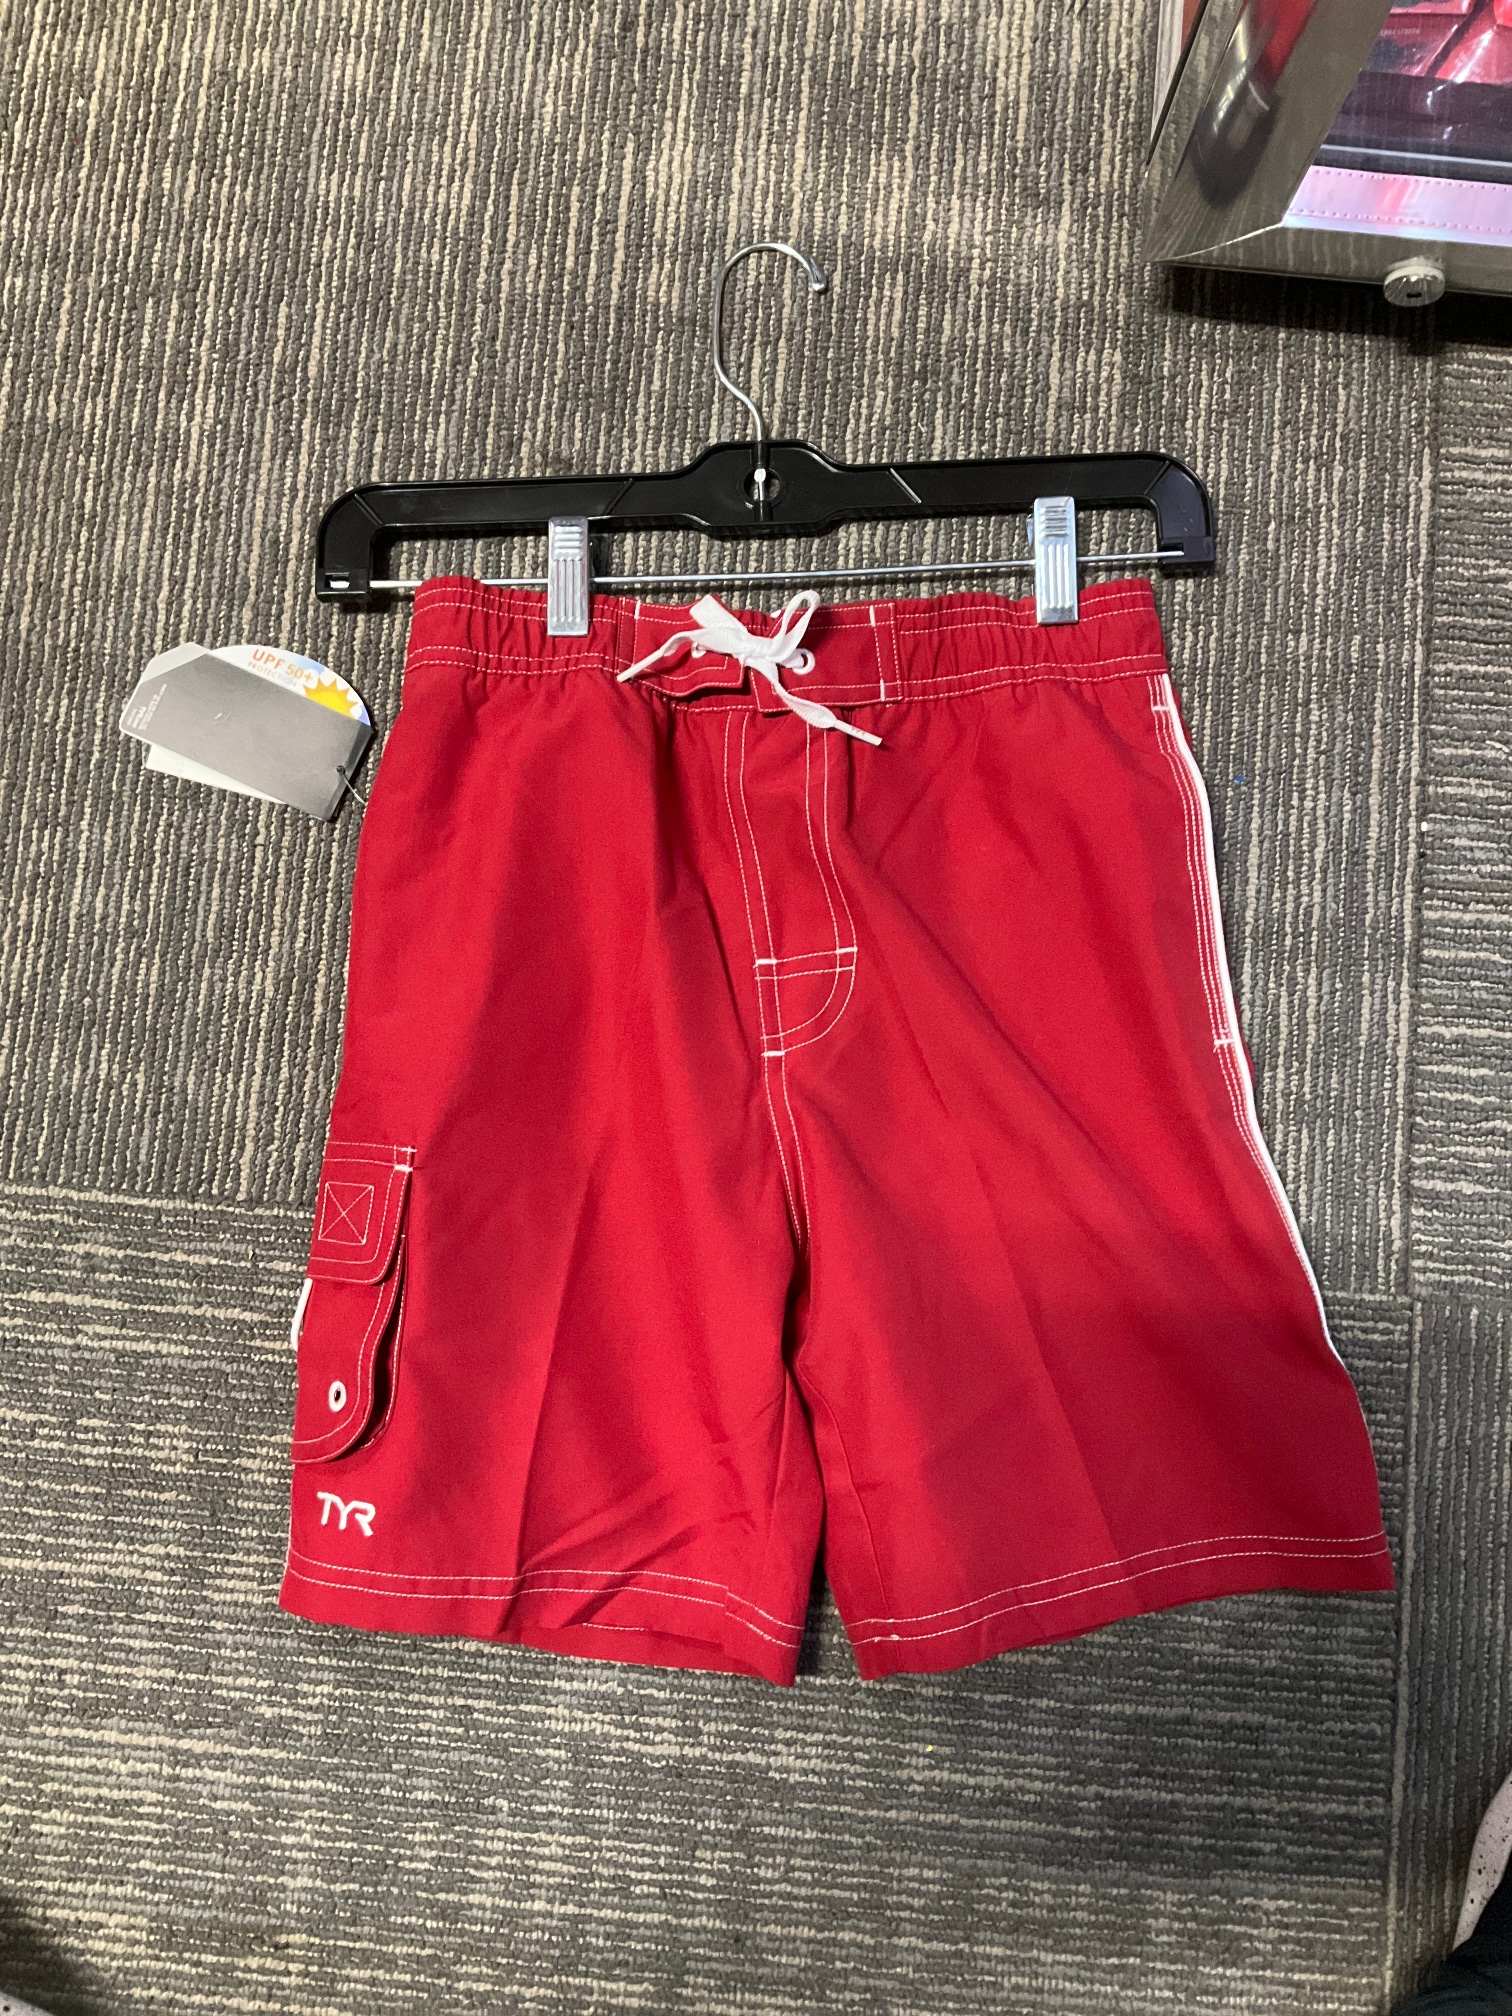 Red New Small Men's TYR Swimsuit